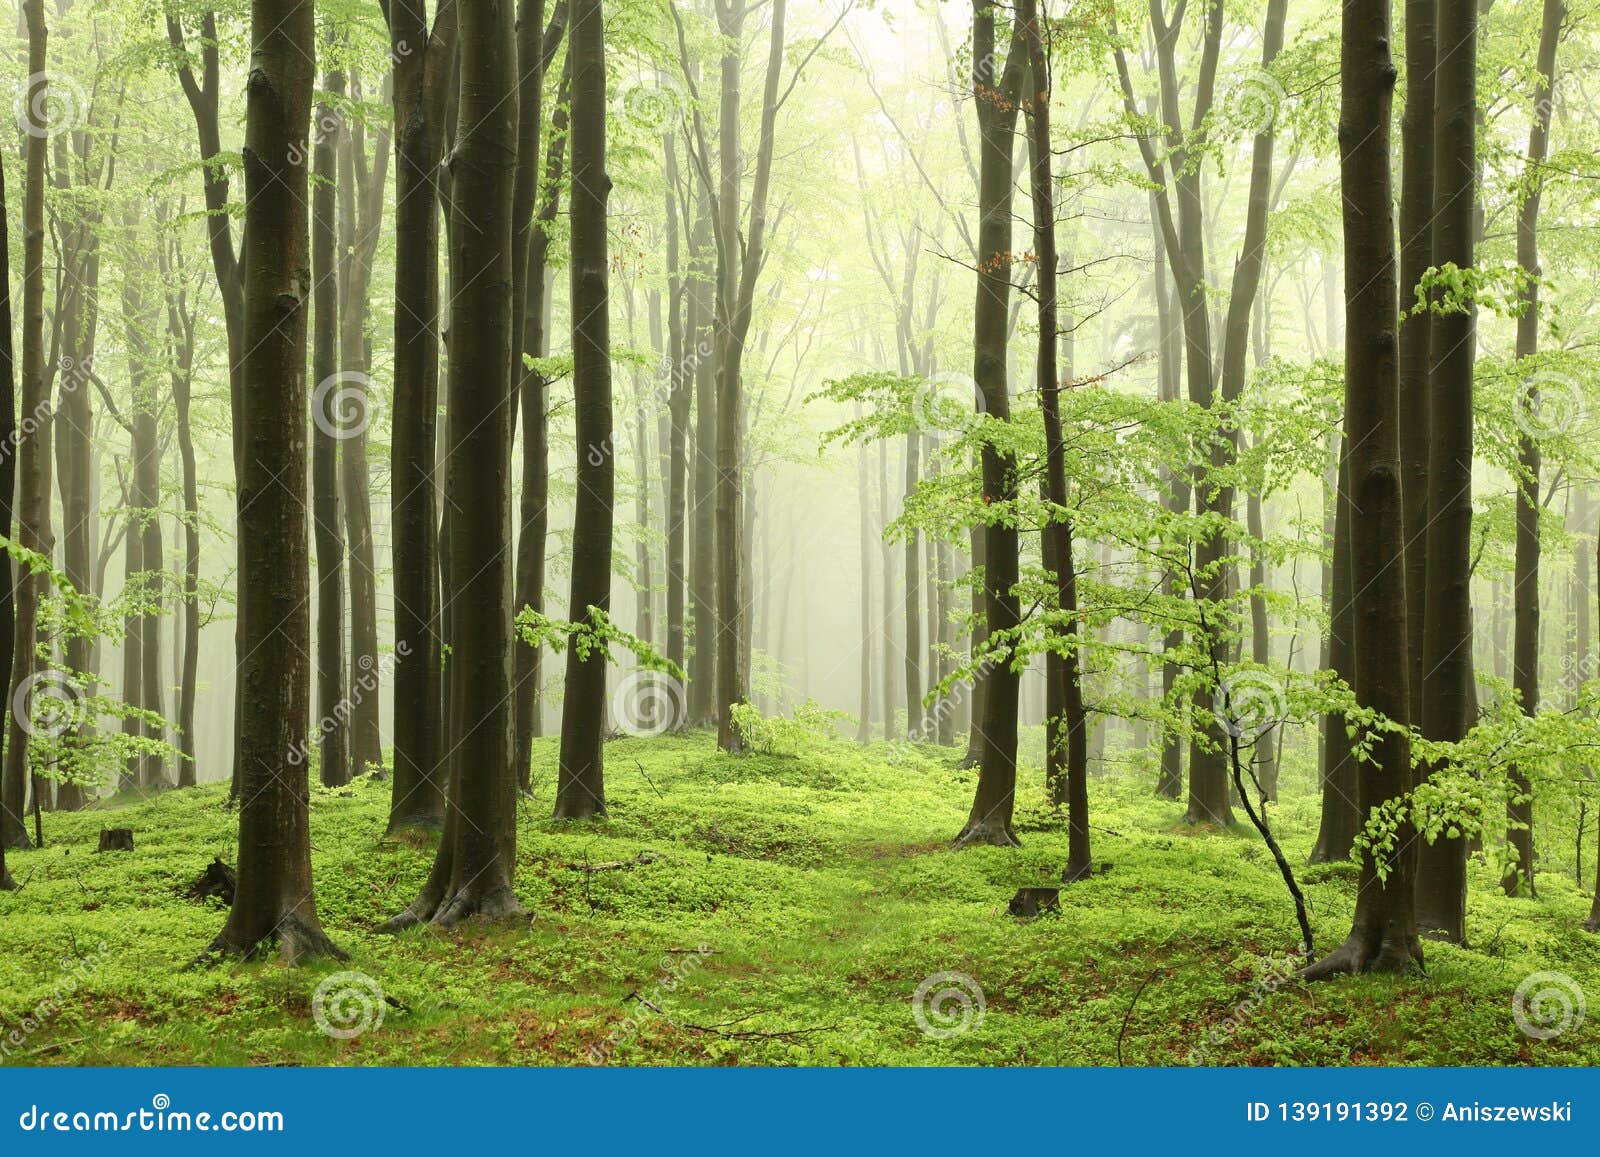 springtime deciduous forest with beech trees covered with fresh leaves on branches in foggy weather may poland misty spring